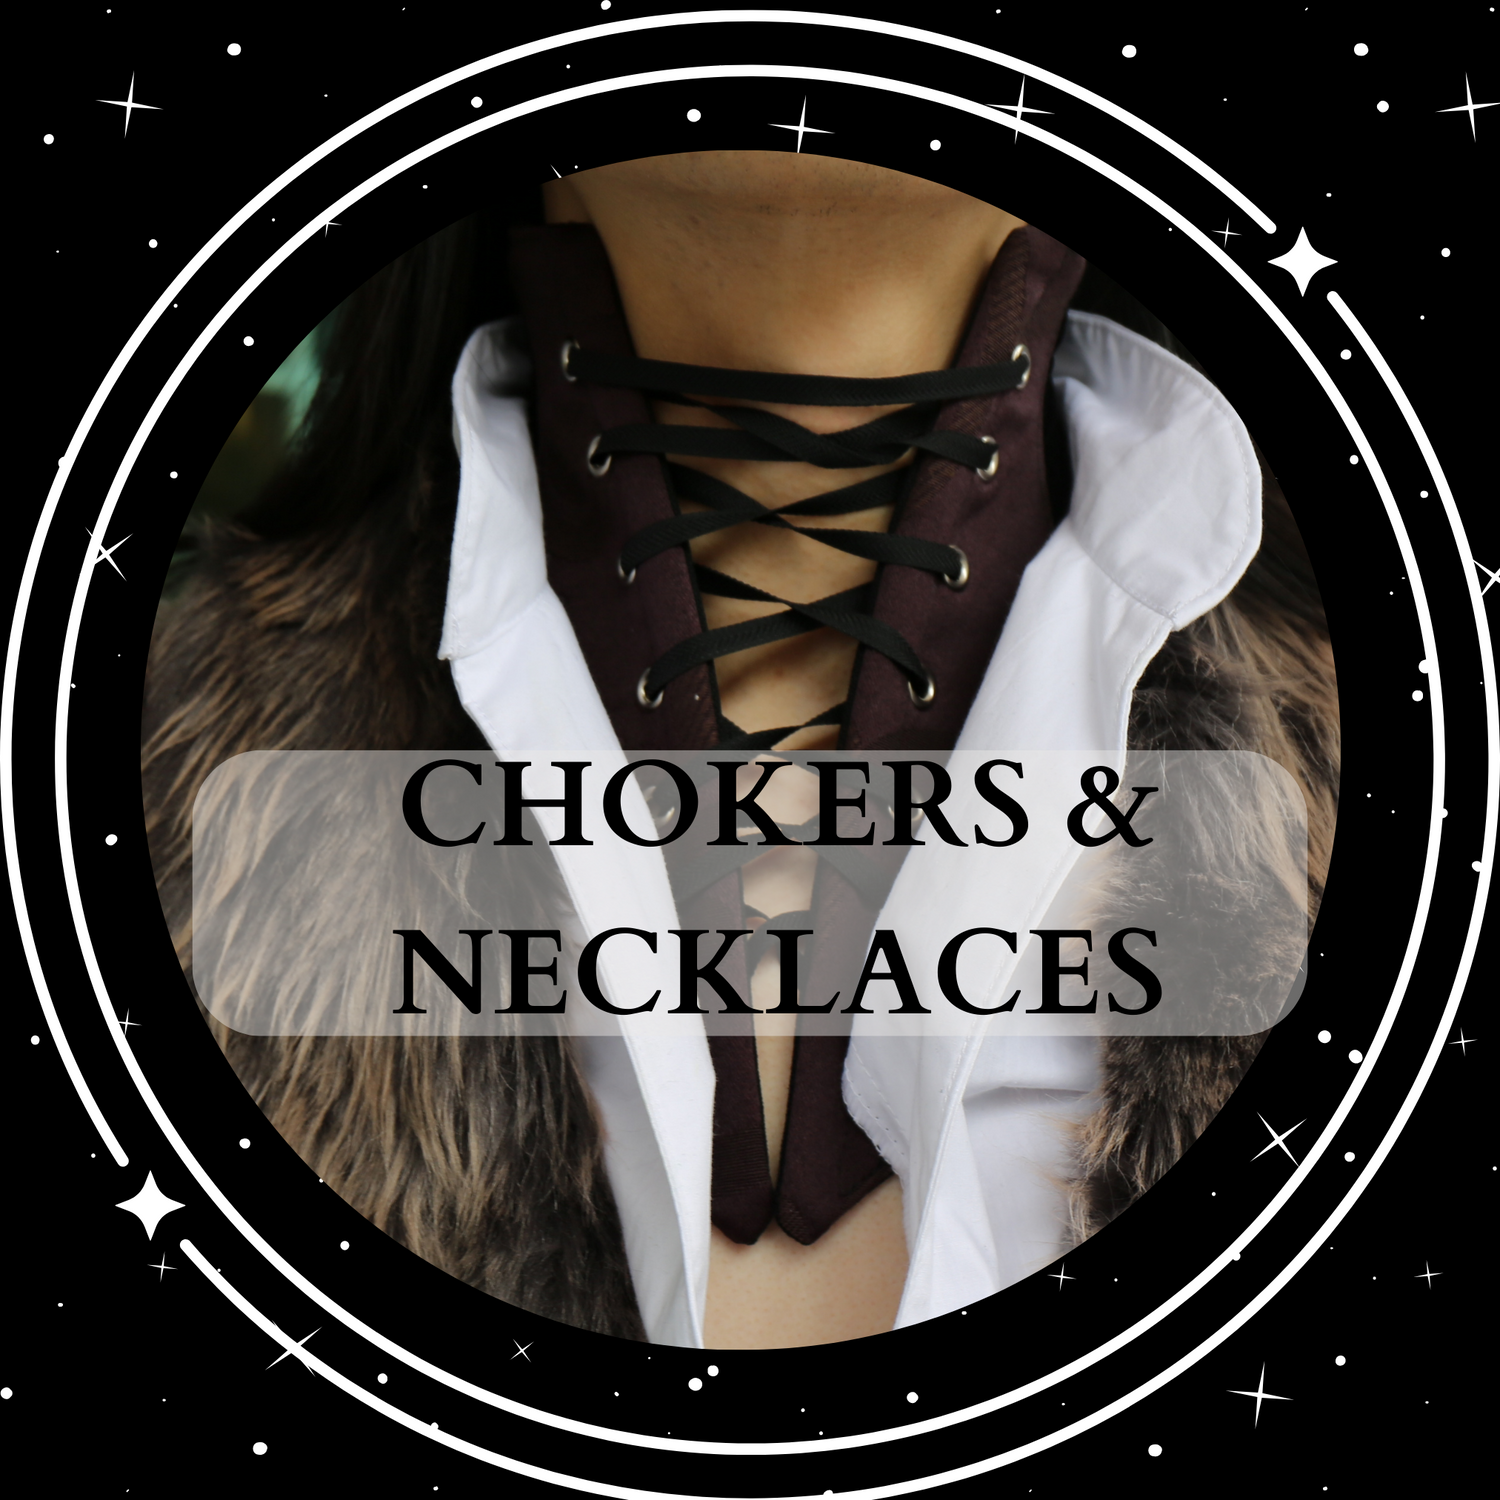 Chokers & Necklaces